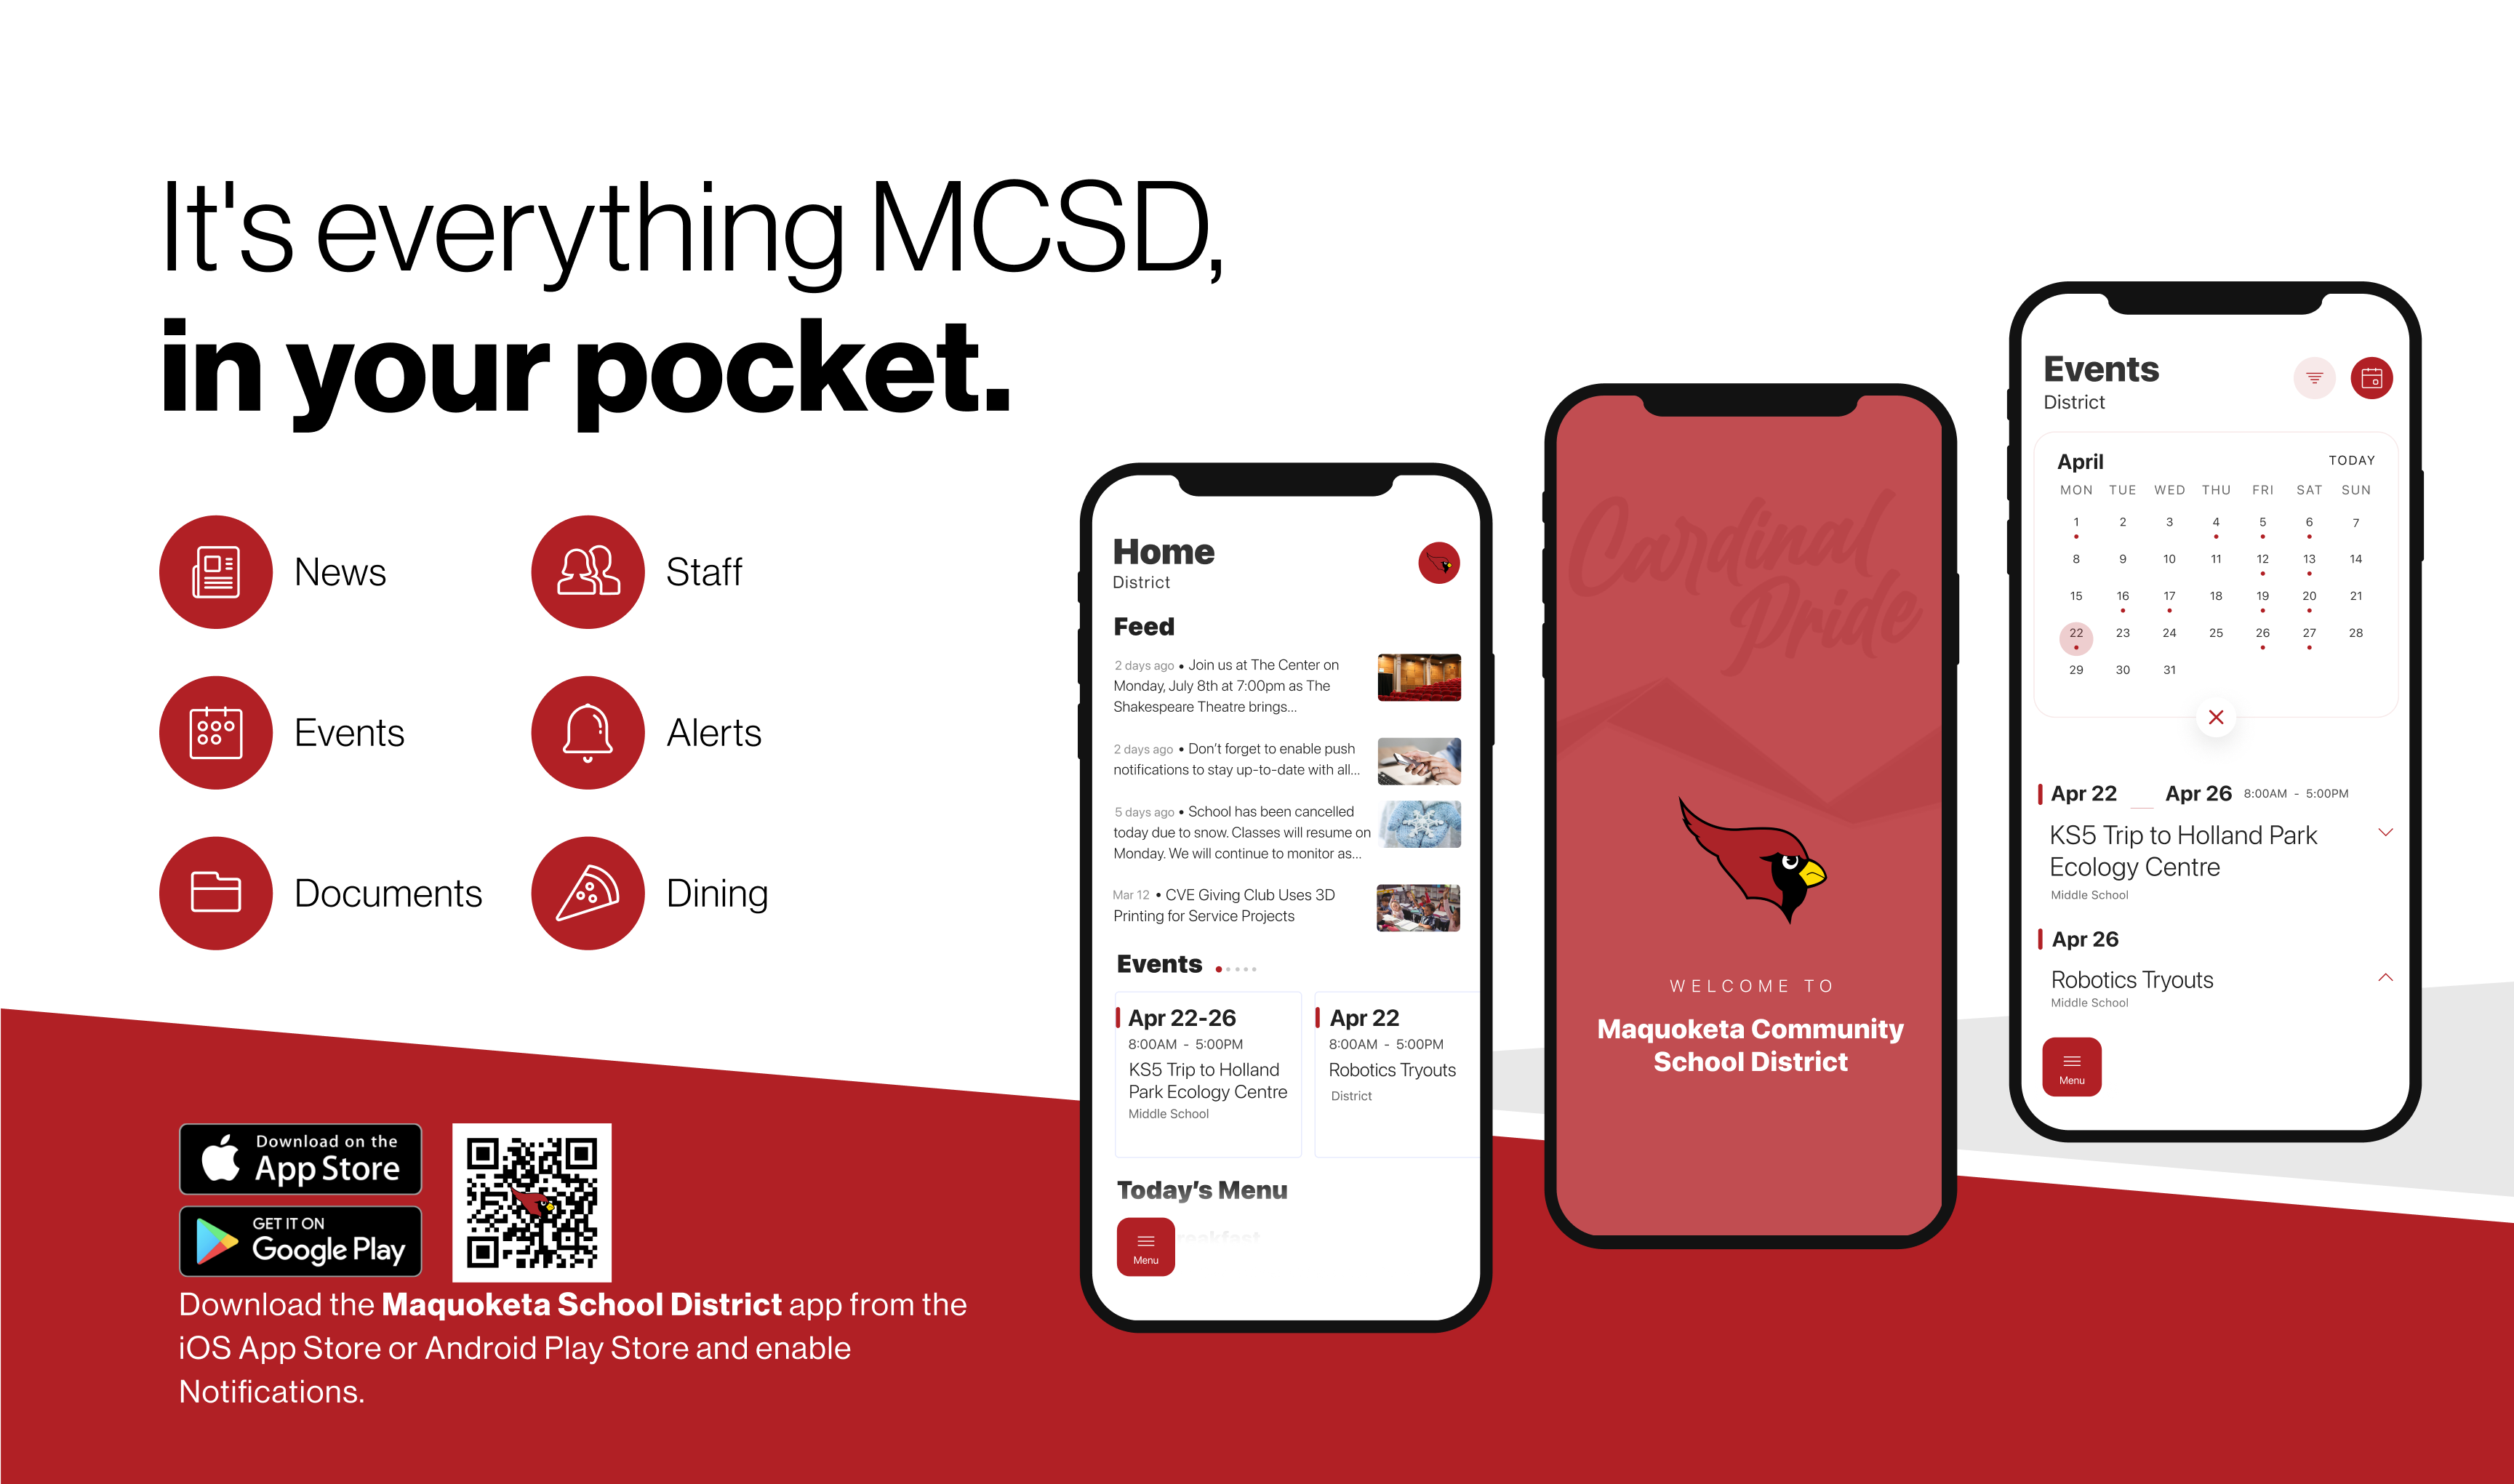 We have a new app! Its everything MCSD in your pocket. 